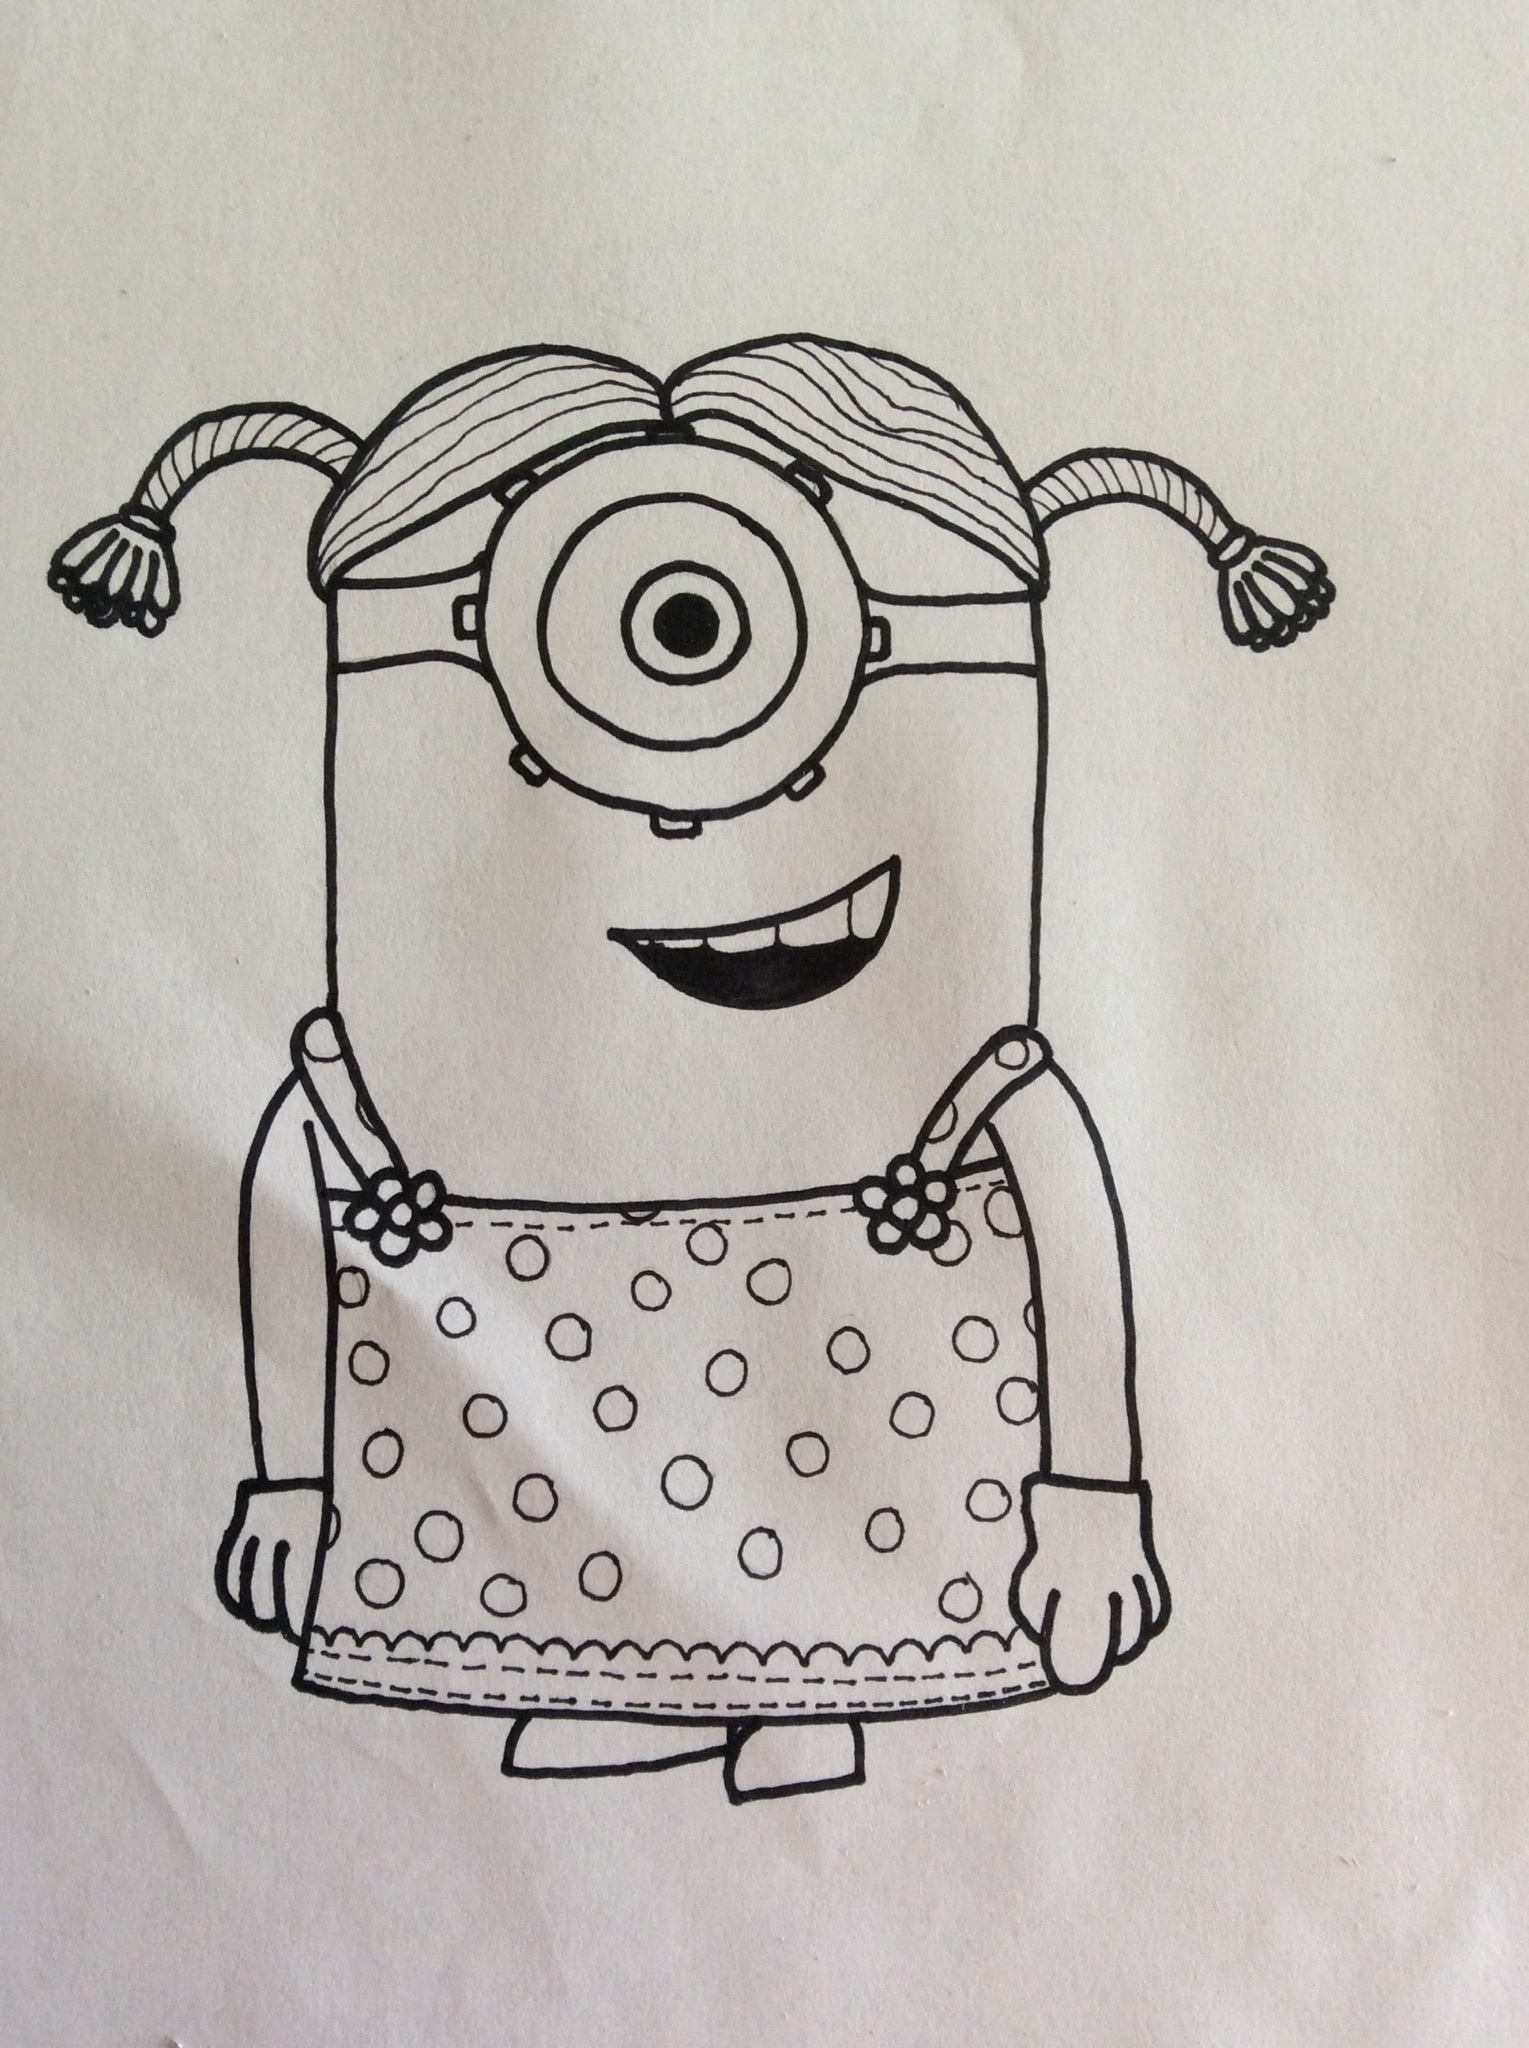 How to Draw a Minion